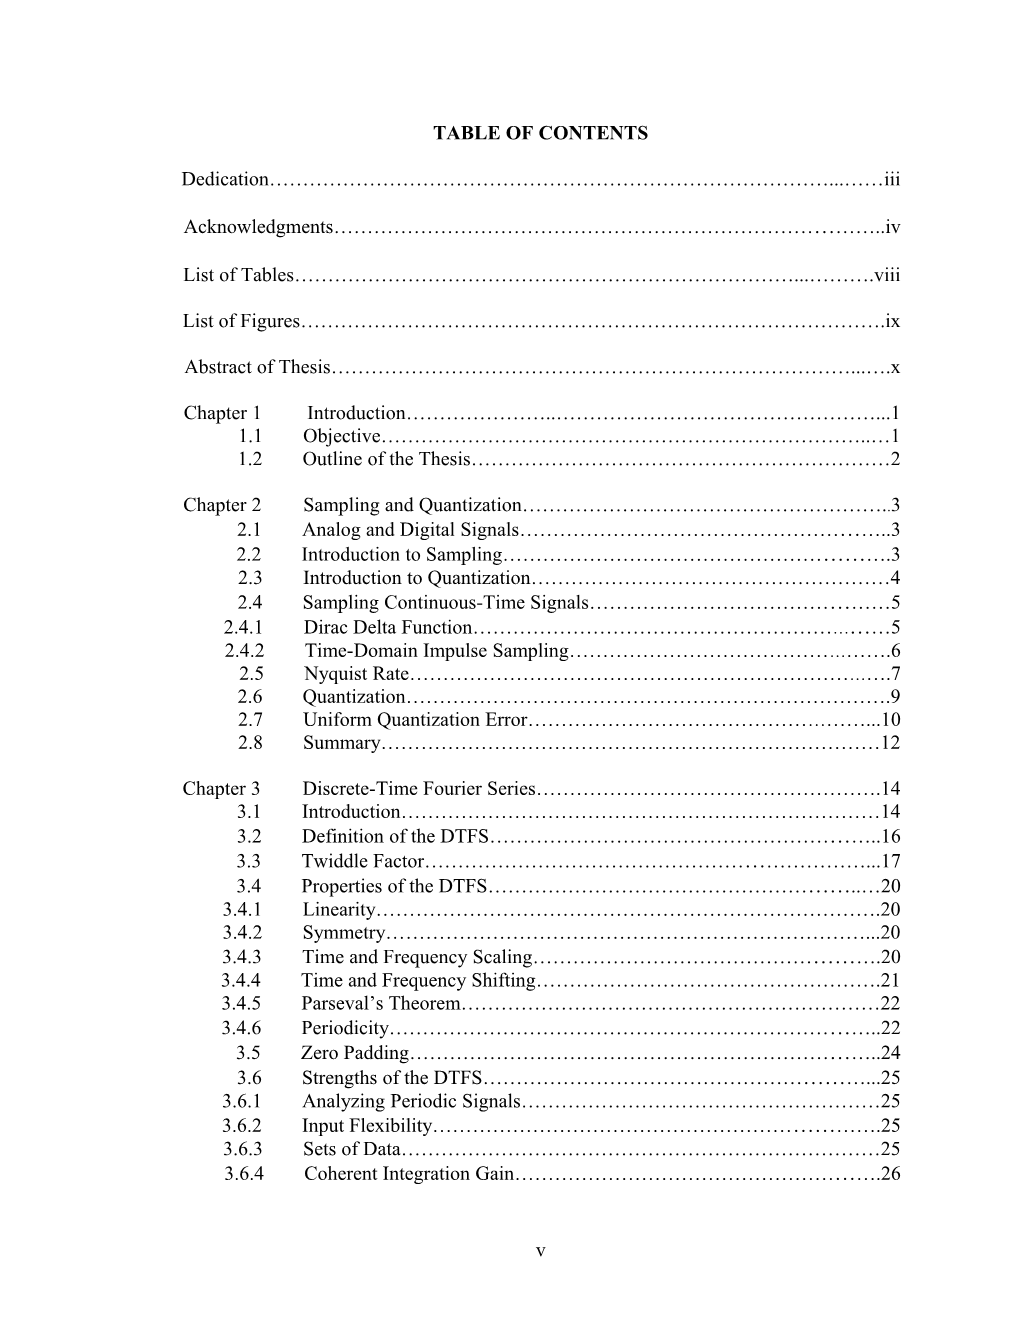 Table of Contents s468